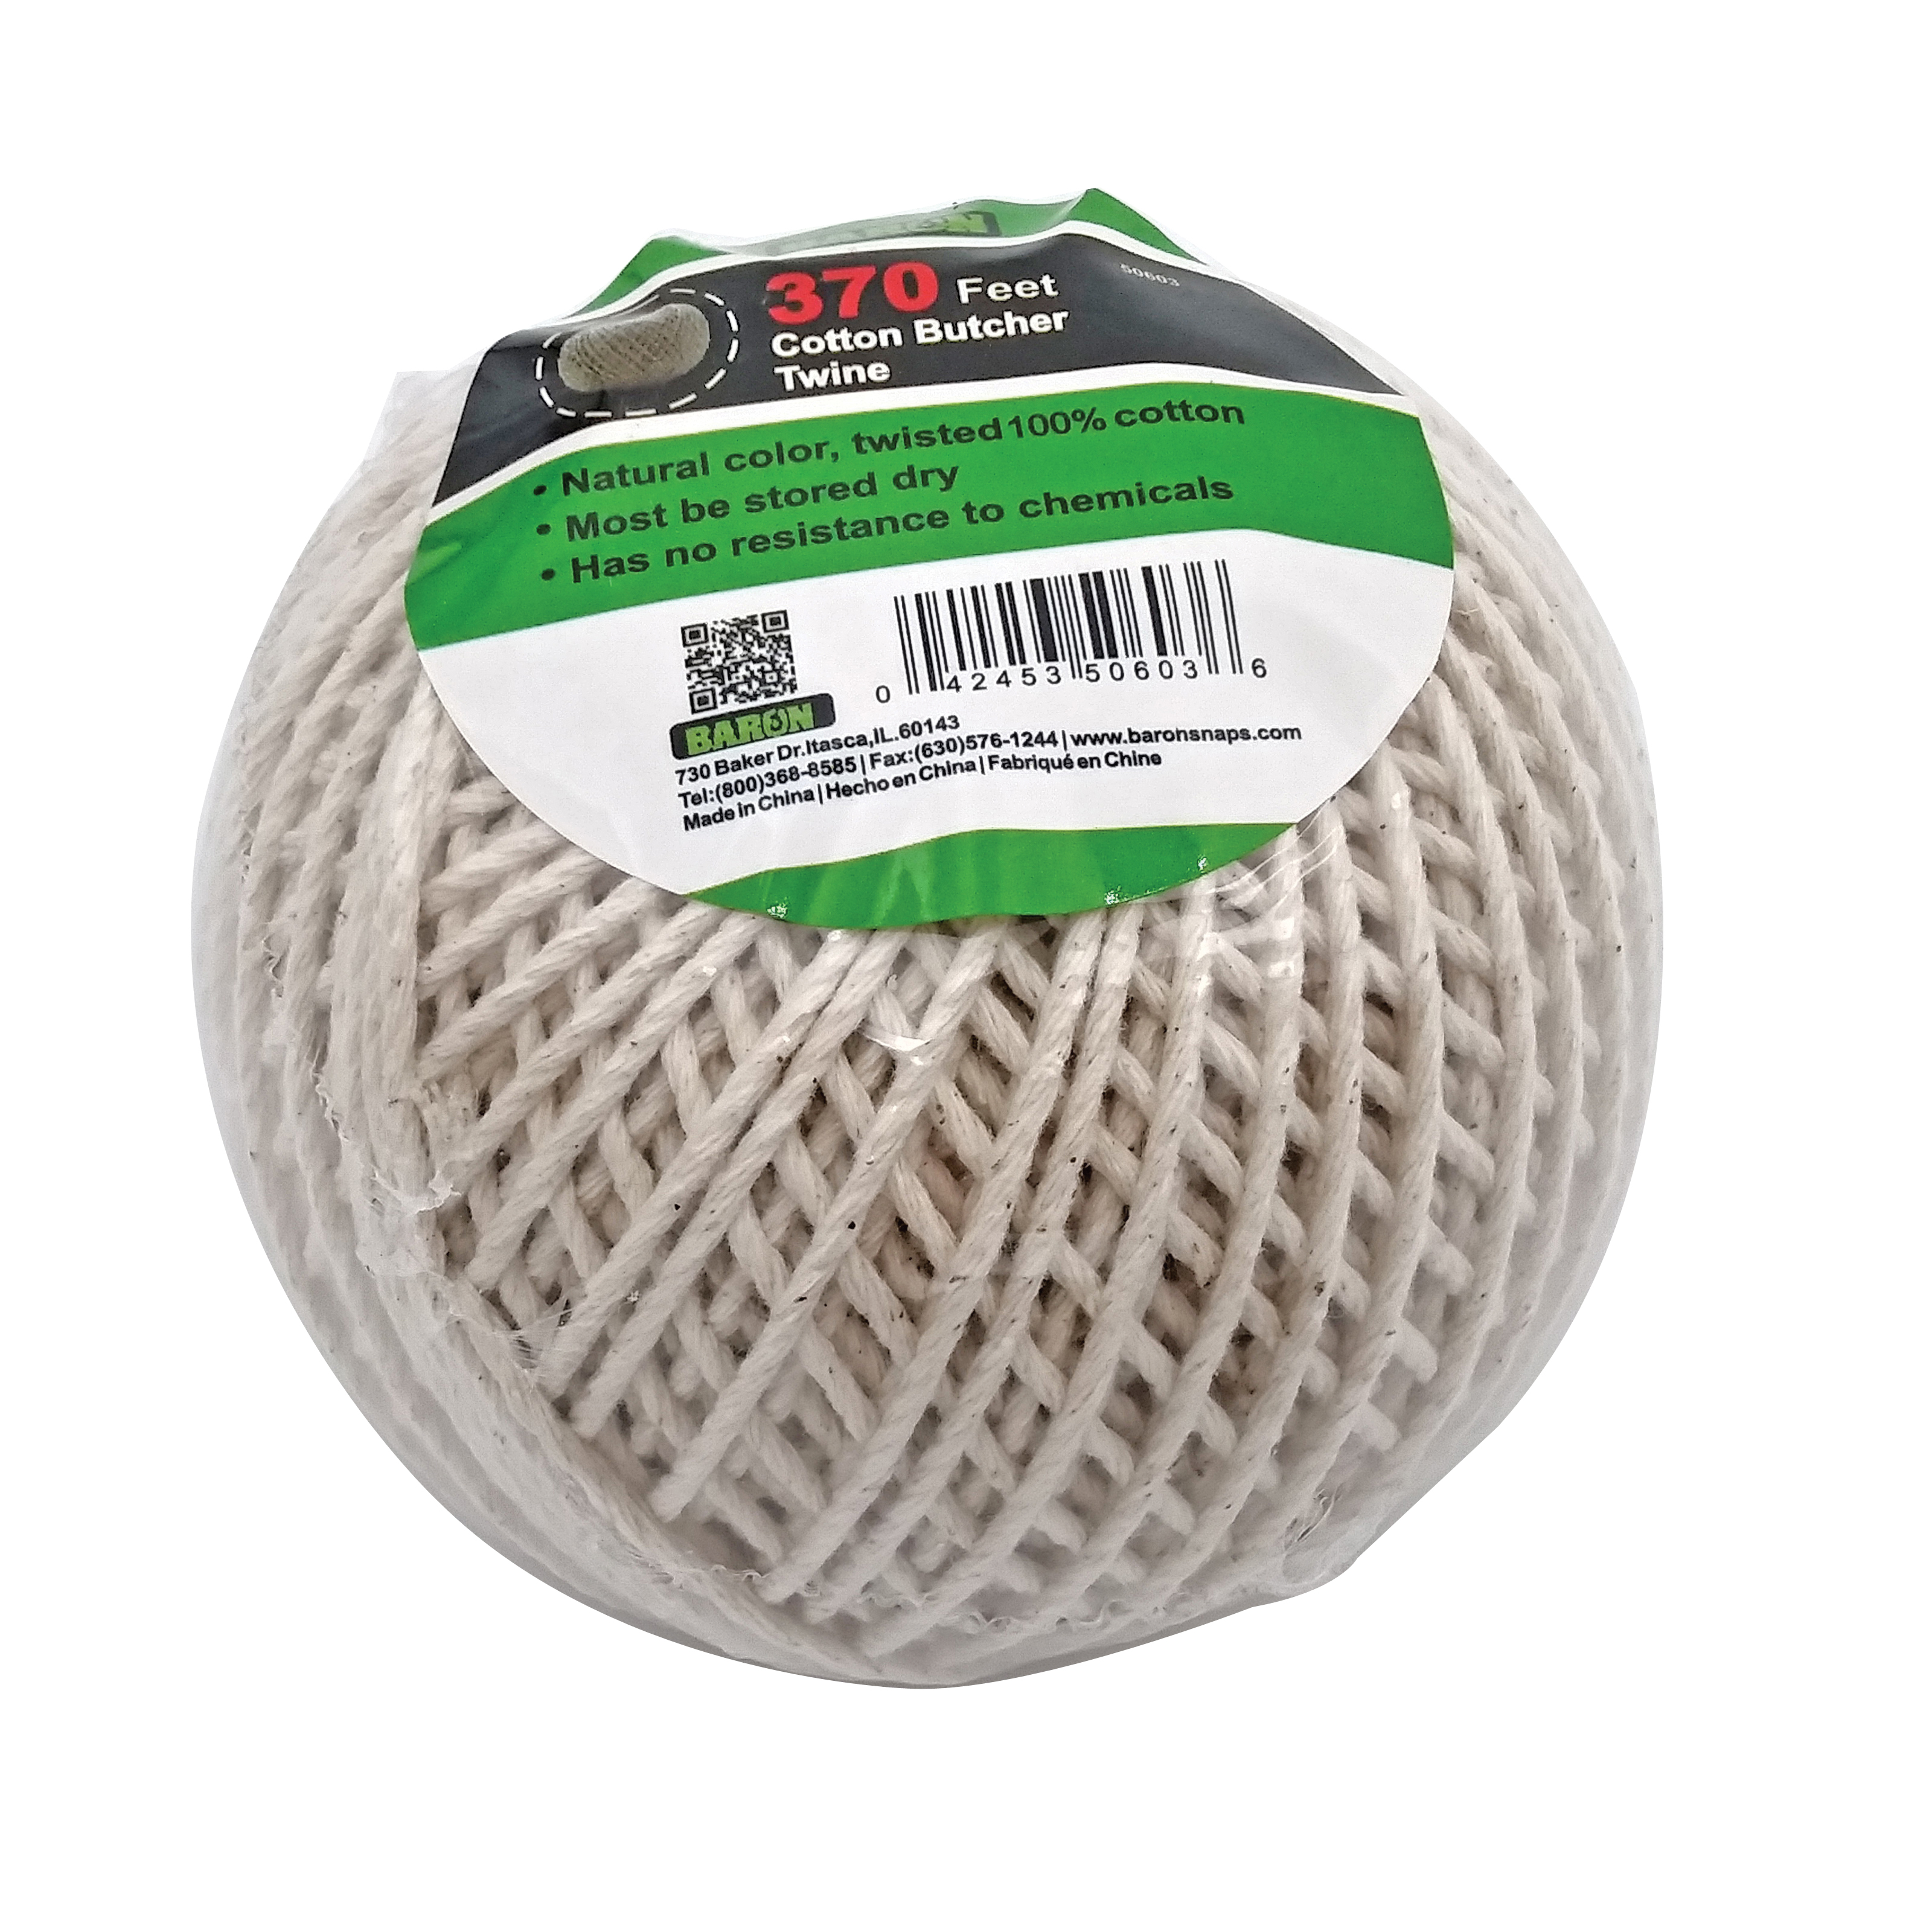 Buy BARON 50603 Butcher Twine, 1/8 in Dia, 370 ft L, 13 lb Working Load,  Cotton, Brown Brown